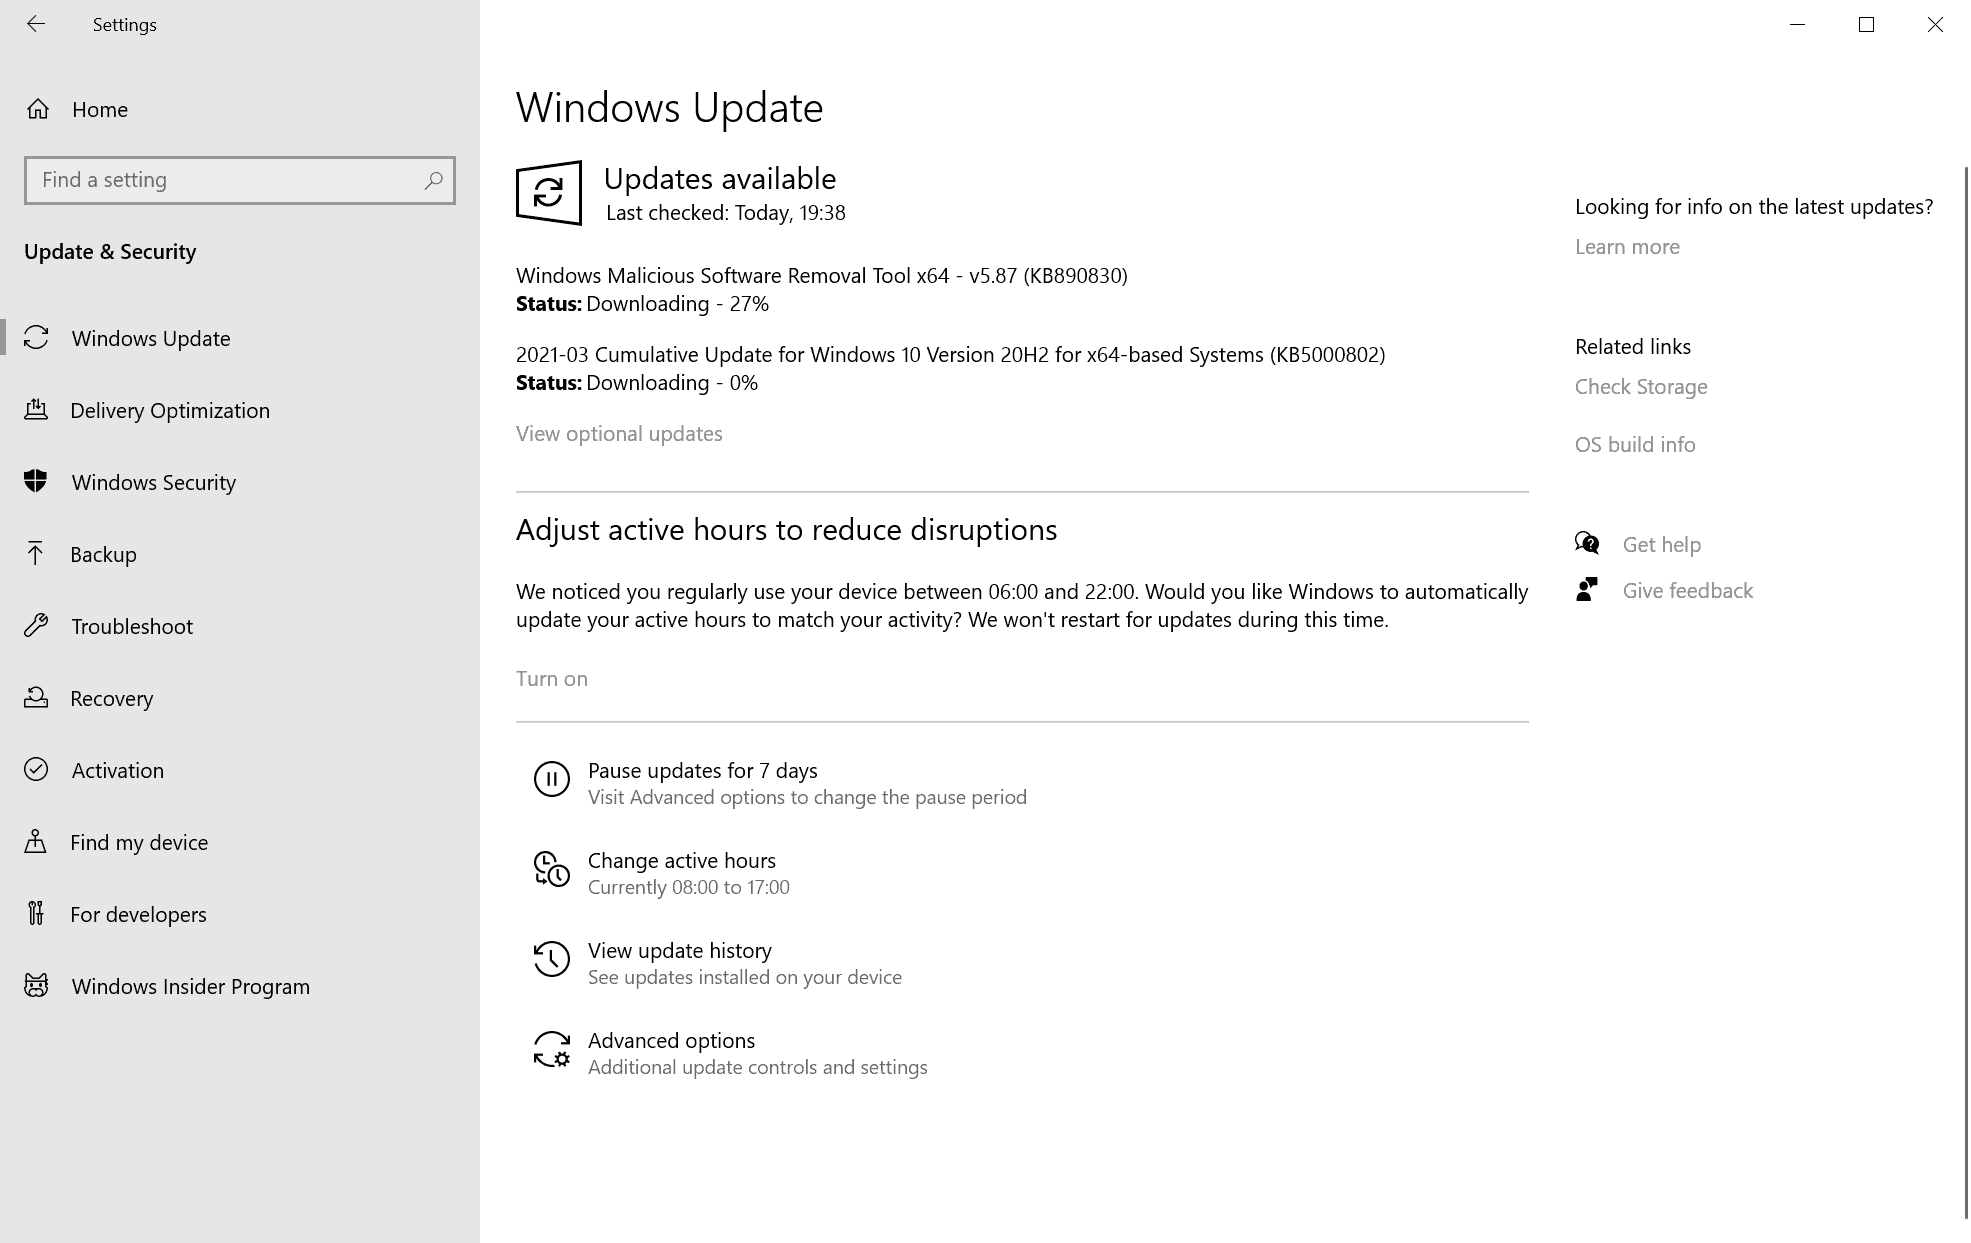 March 2021 cumulative updates cause printing bluescreens on Windows 10 devices